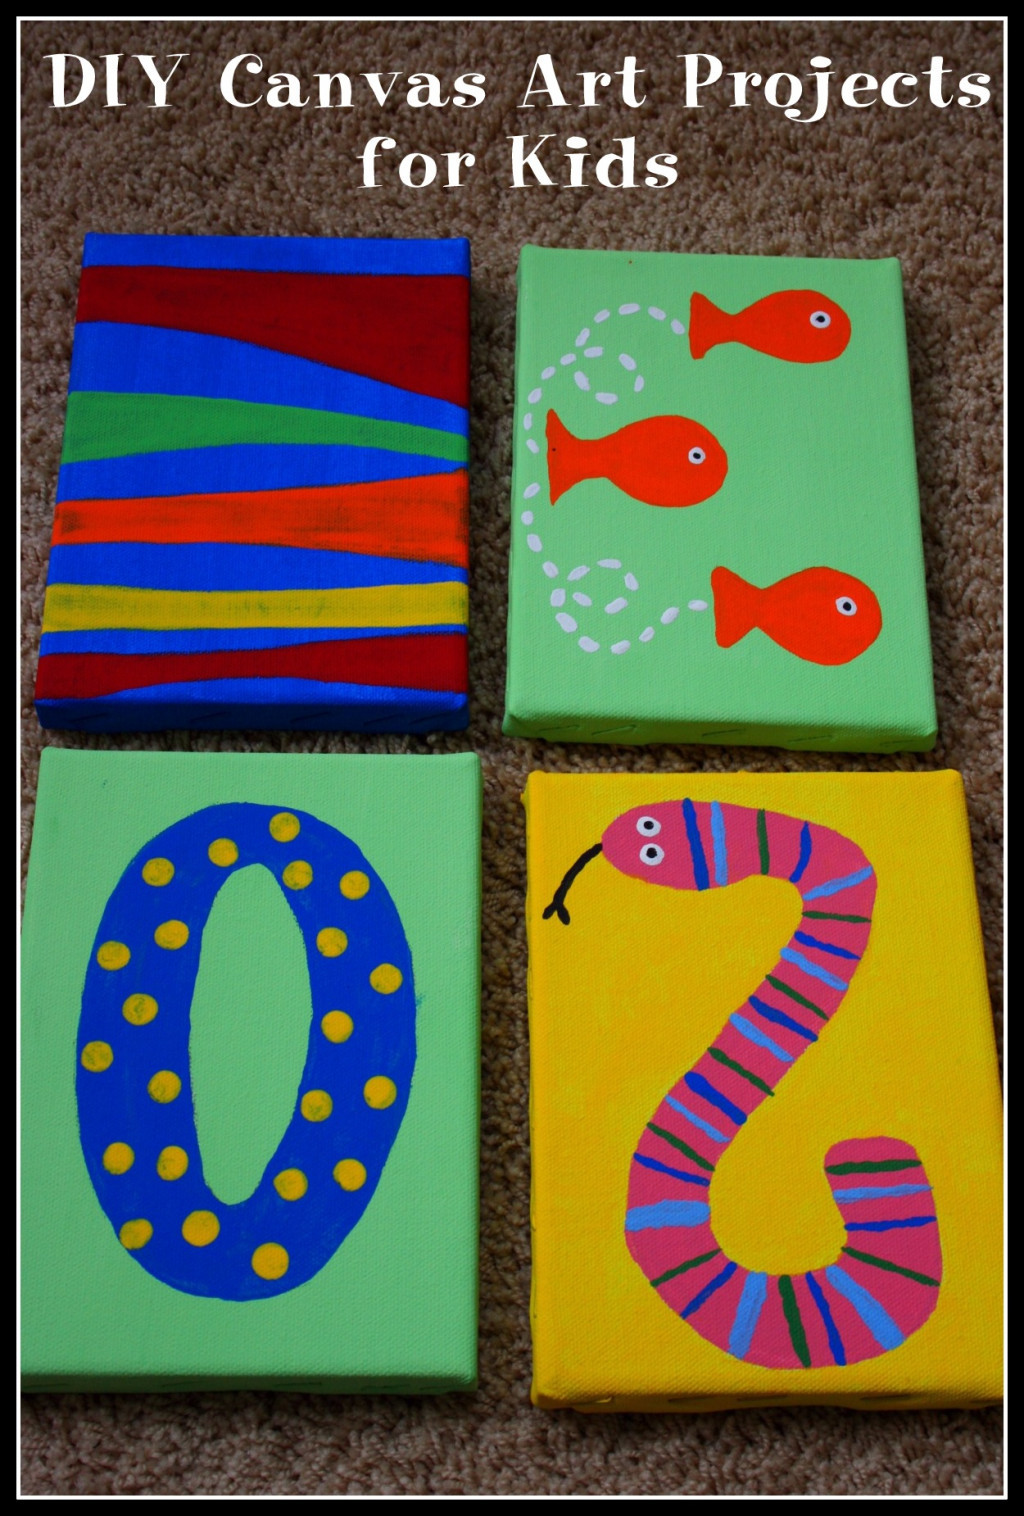 DIY Art For Kids
 DIY Canvas Art Projects for Kids